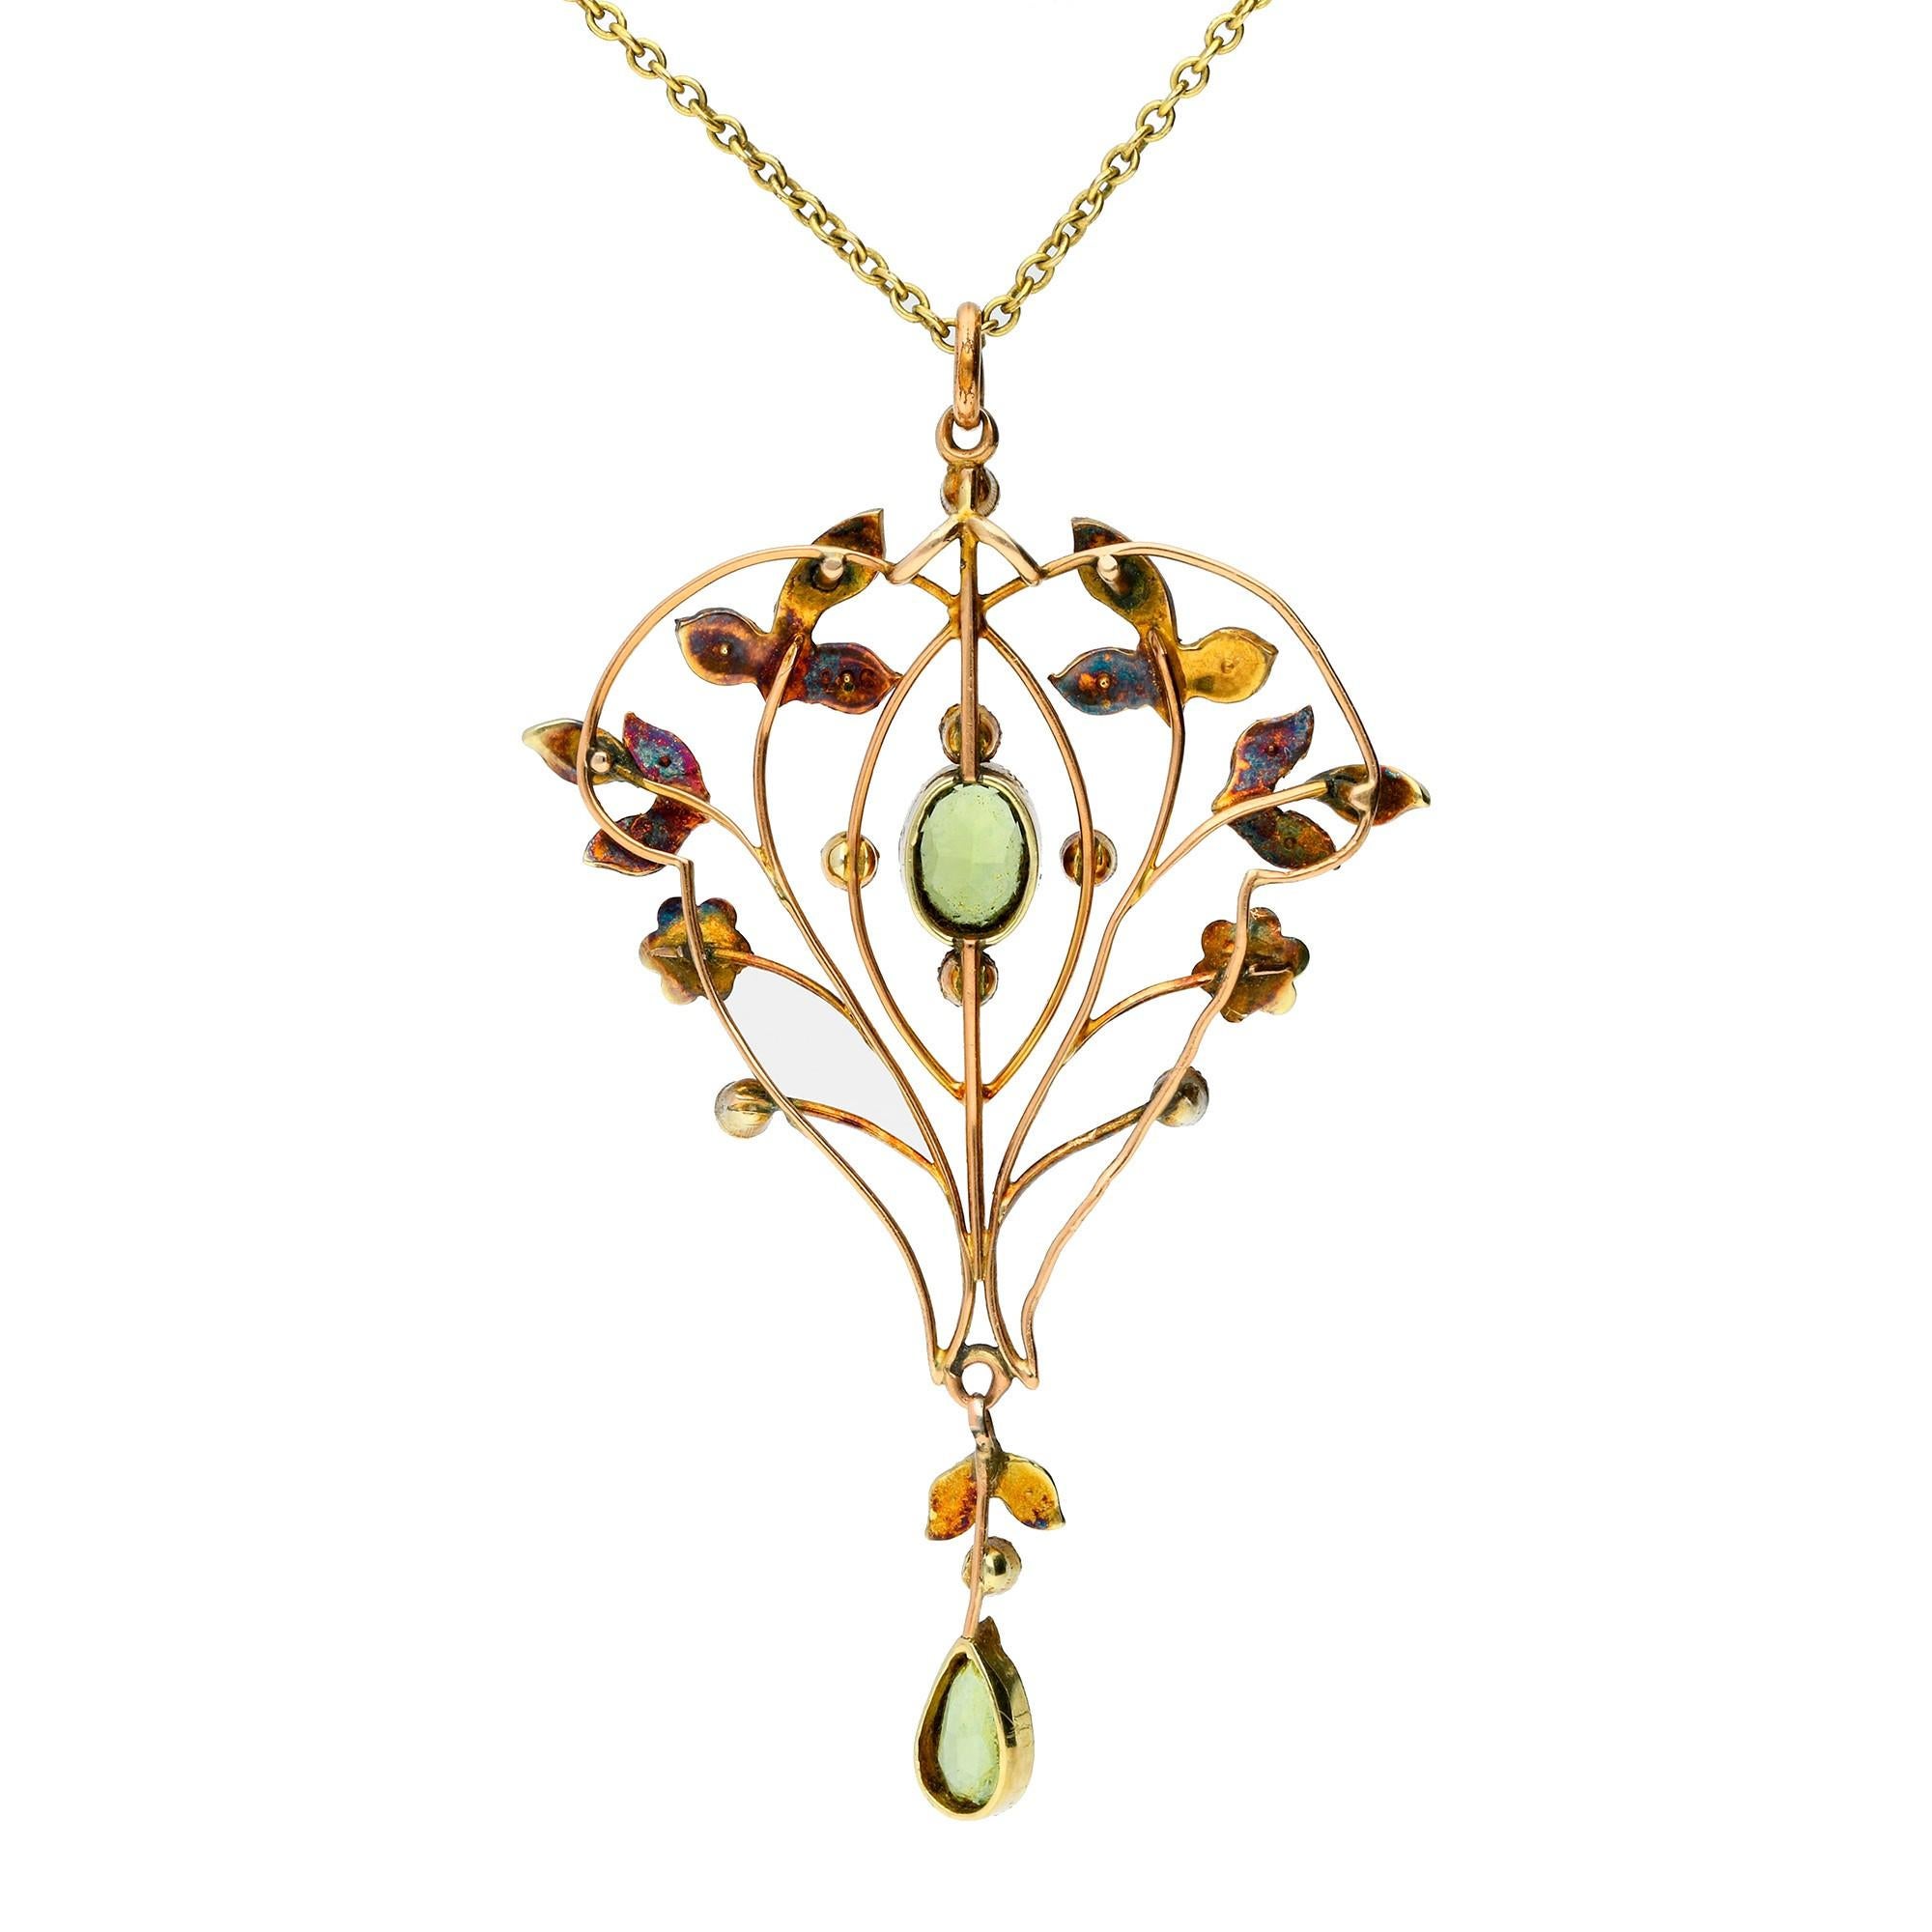 This lovely early 20th century pendant, with floral inspiration. Decorated with foliate motif, set with shimmering split pearls and vivid peridot highlights, suspended from a yellow metal chain.

A lovely piece, that would be the perfect bridal